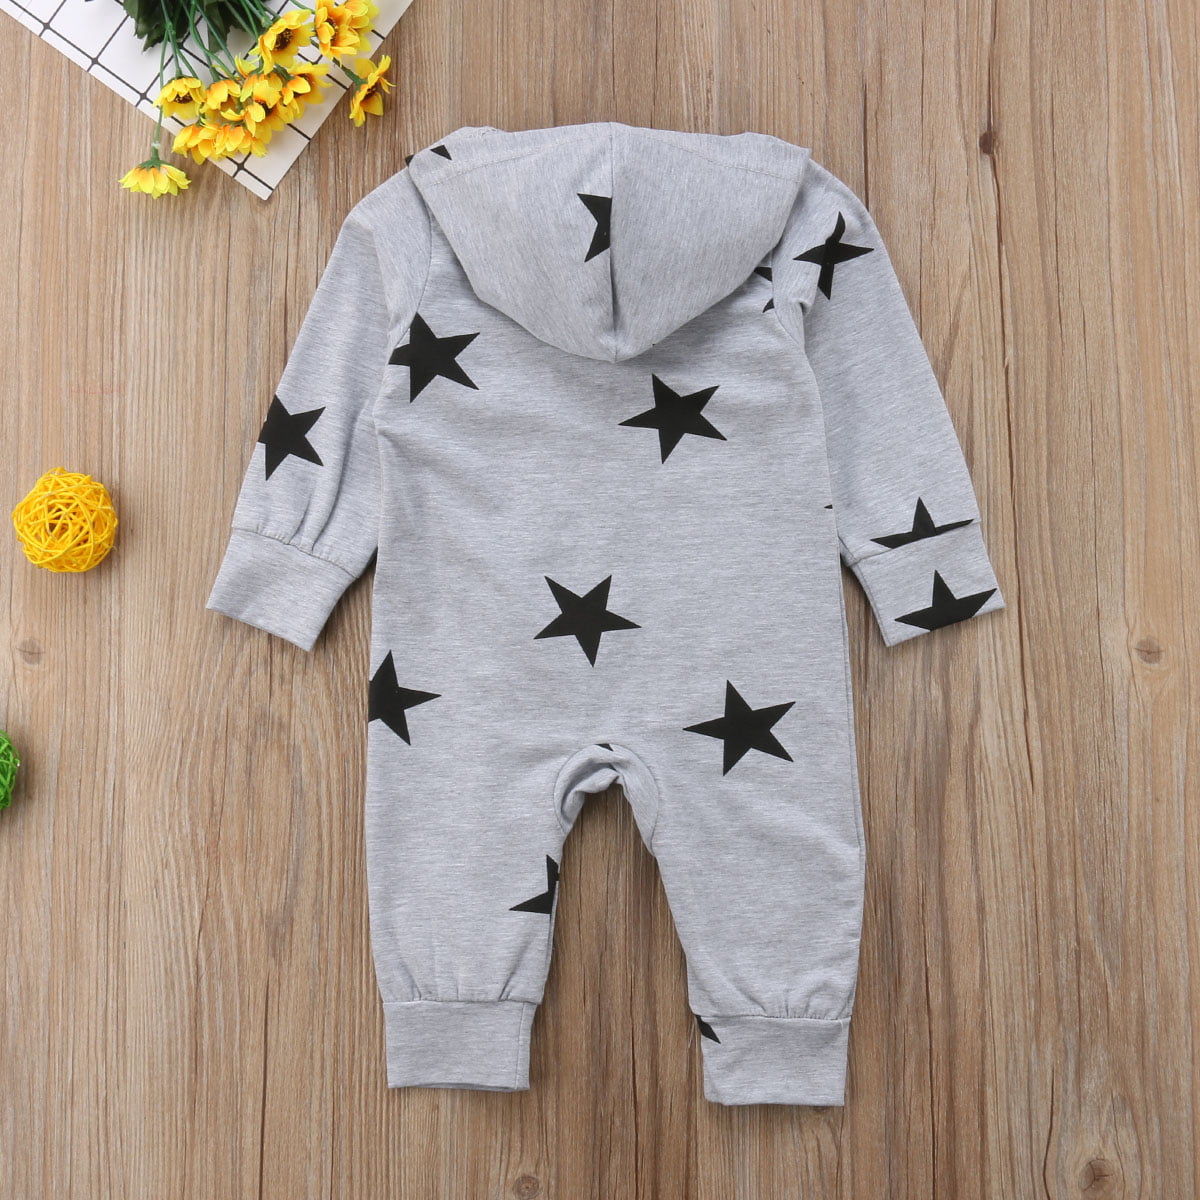 GongYe This Child We Have Prayed Baby Boys Girls Romper Bodysuit Infant Cool Jumpsuit Gray